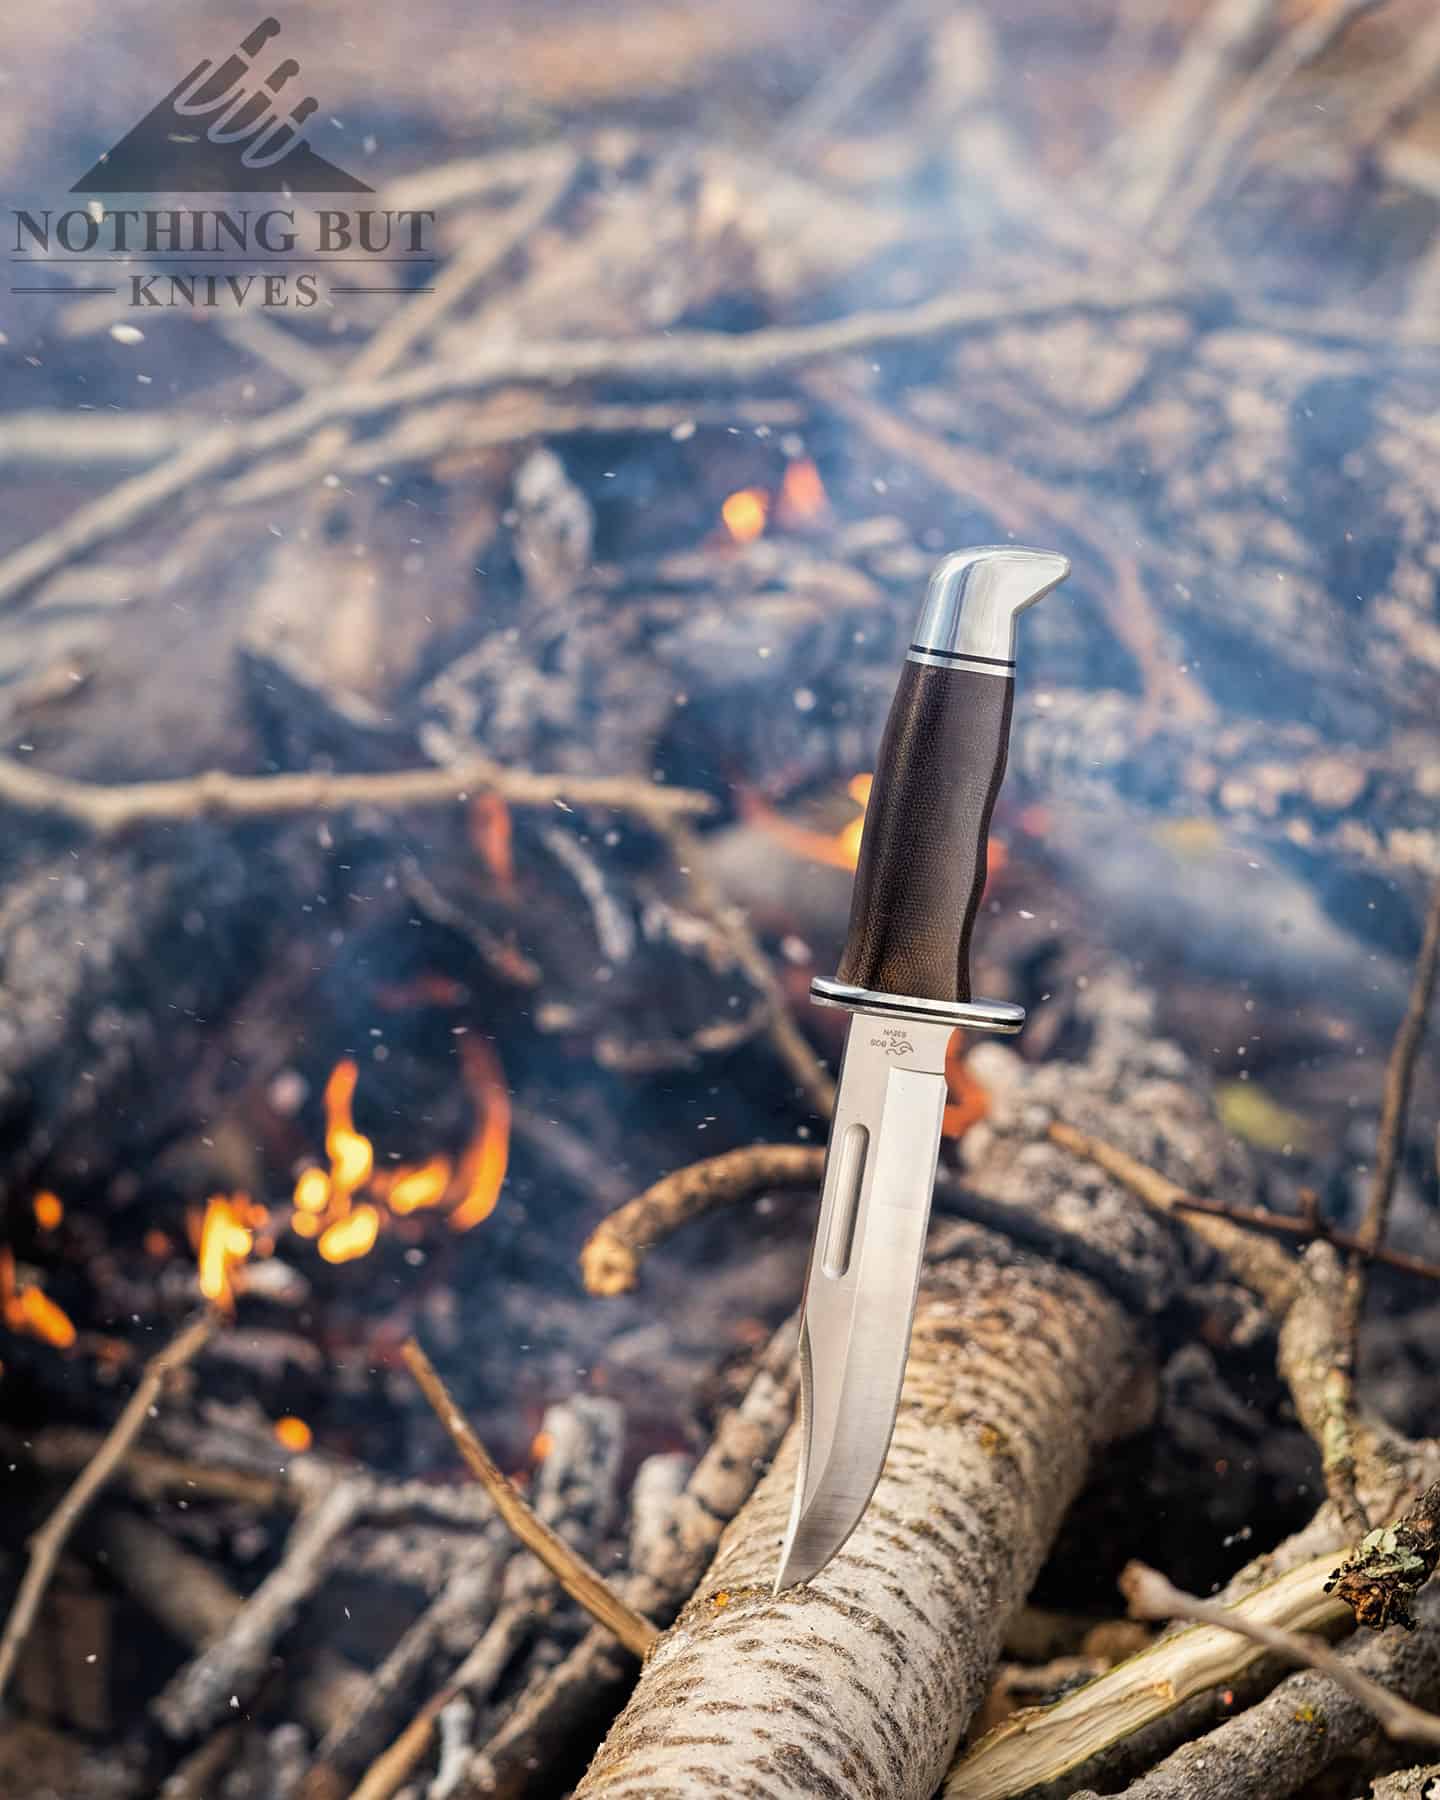 The Buck 119 has a long track record as a tactical knife with the military and hunters.